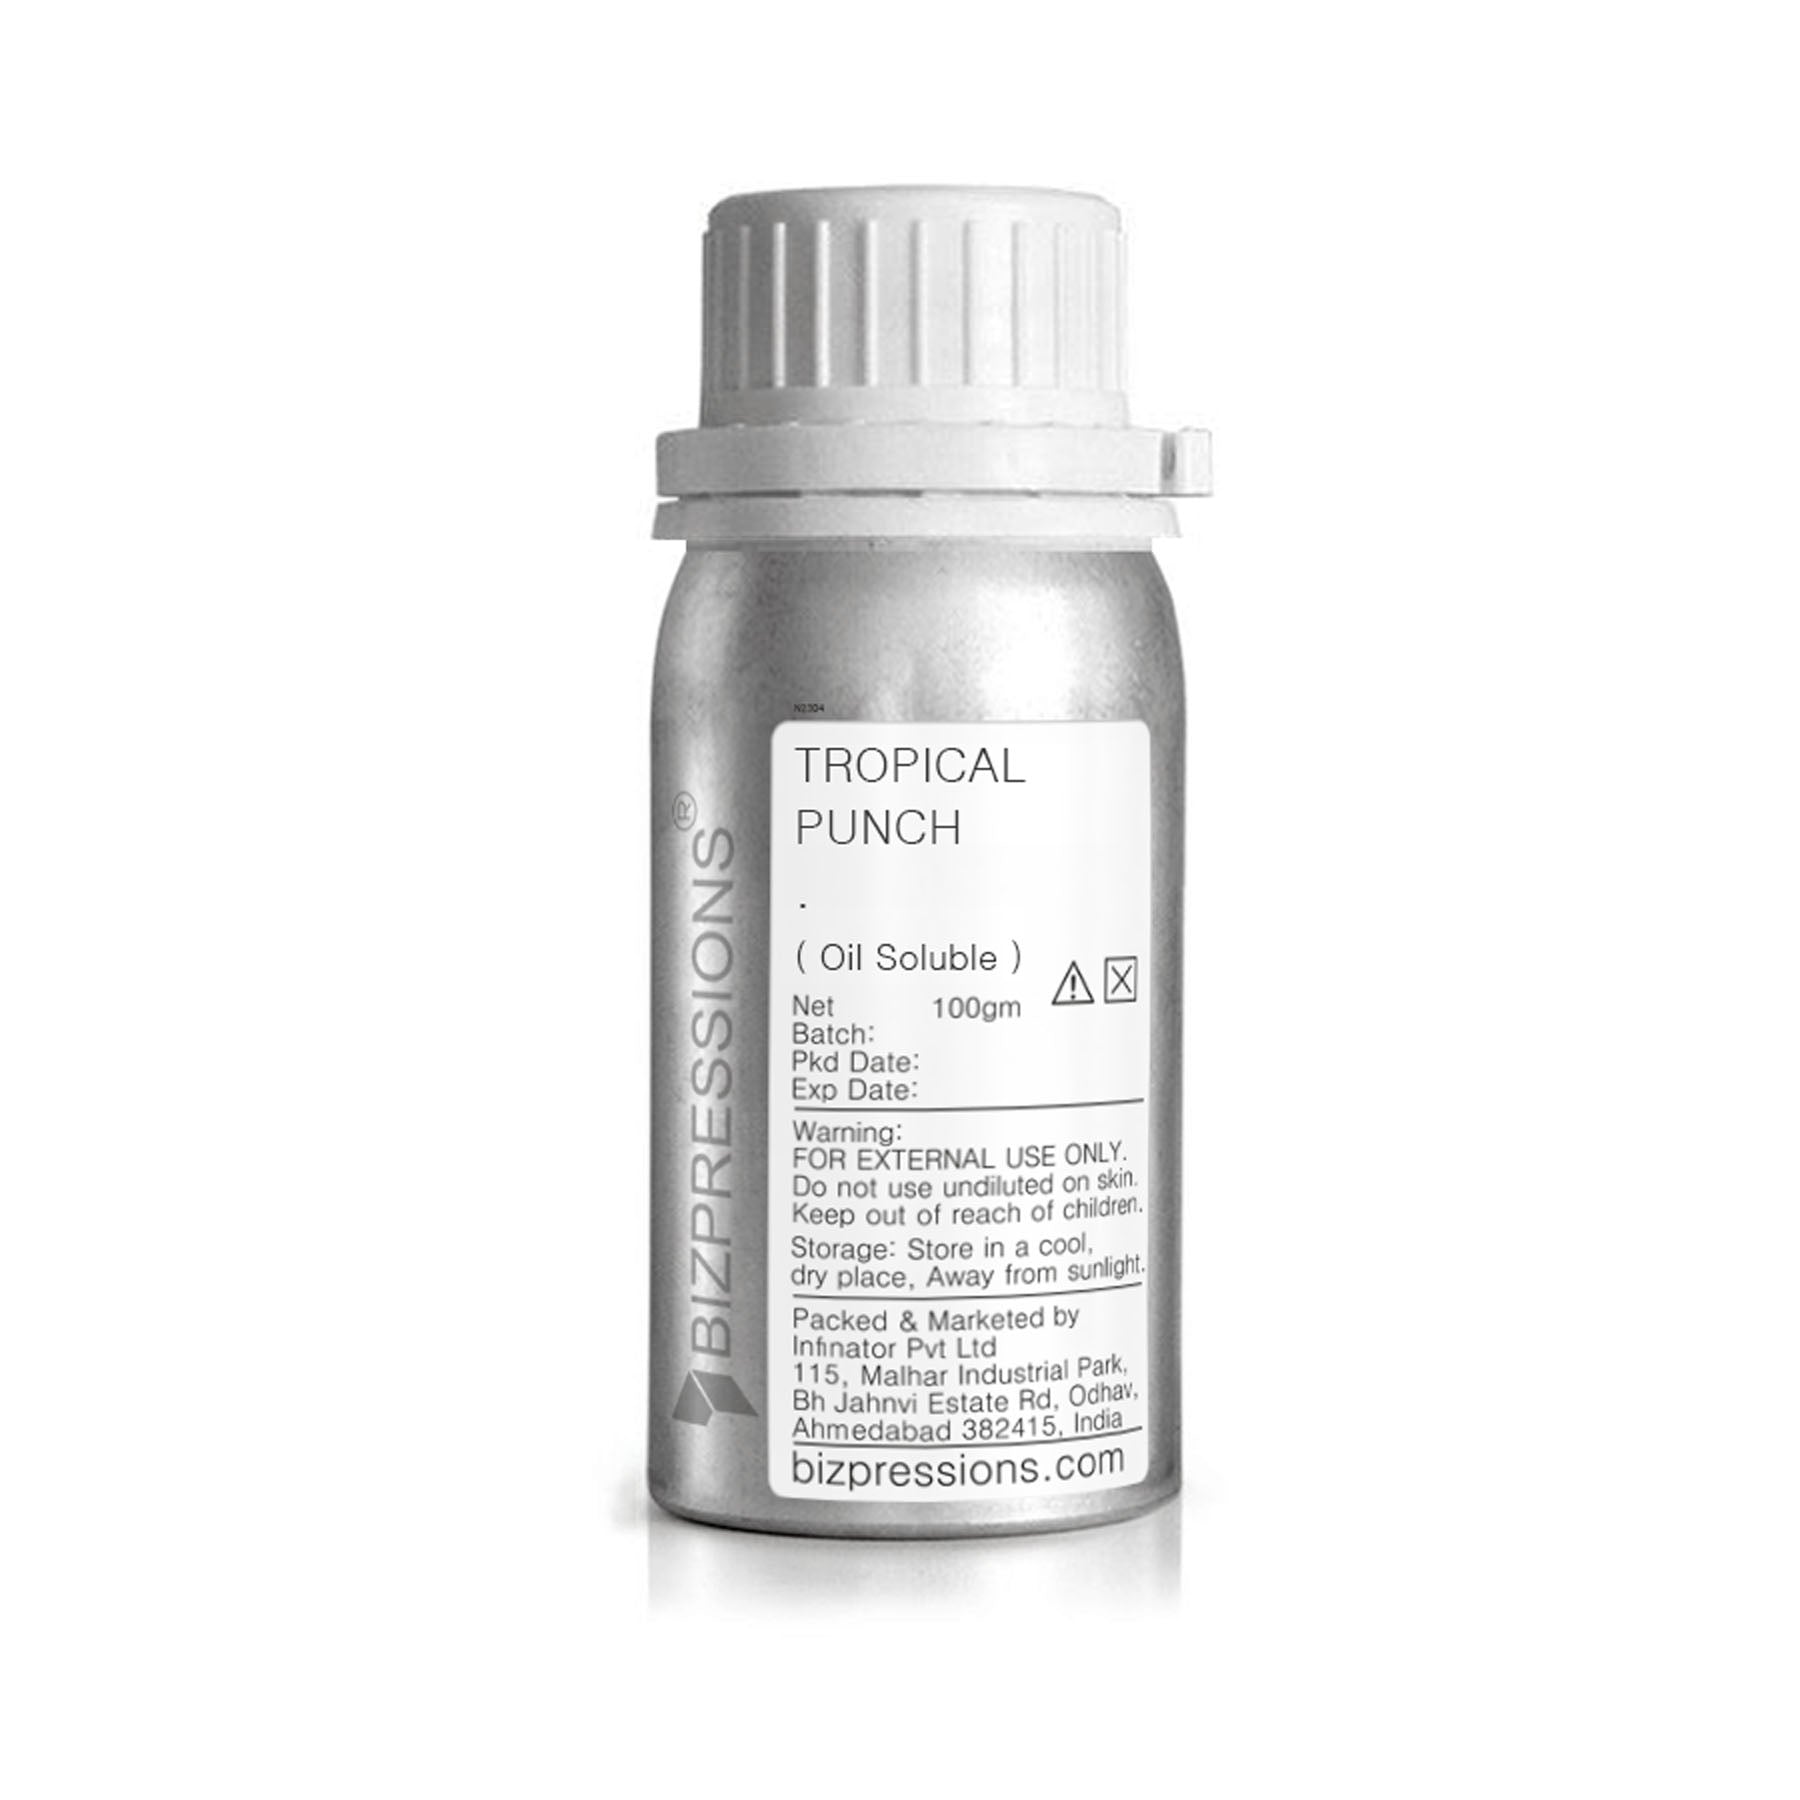 TROPICAL PUNCH - Fragrance ( Oil Soluble ) - 100 gm